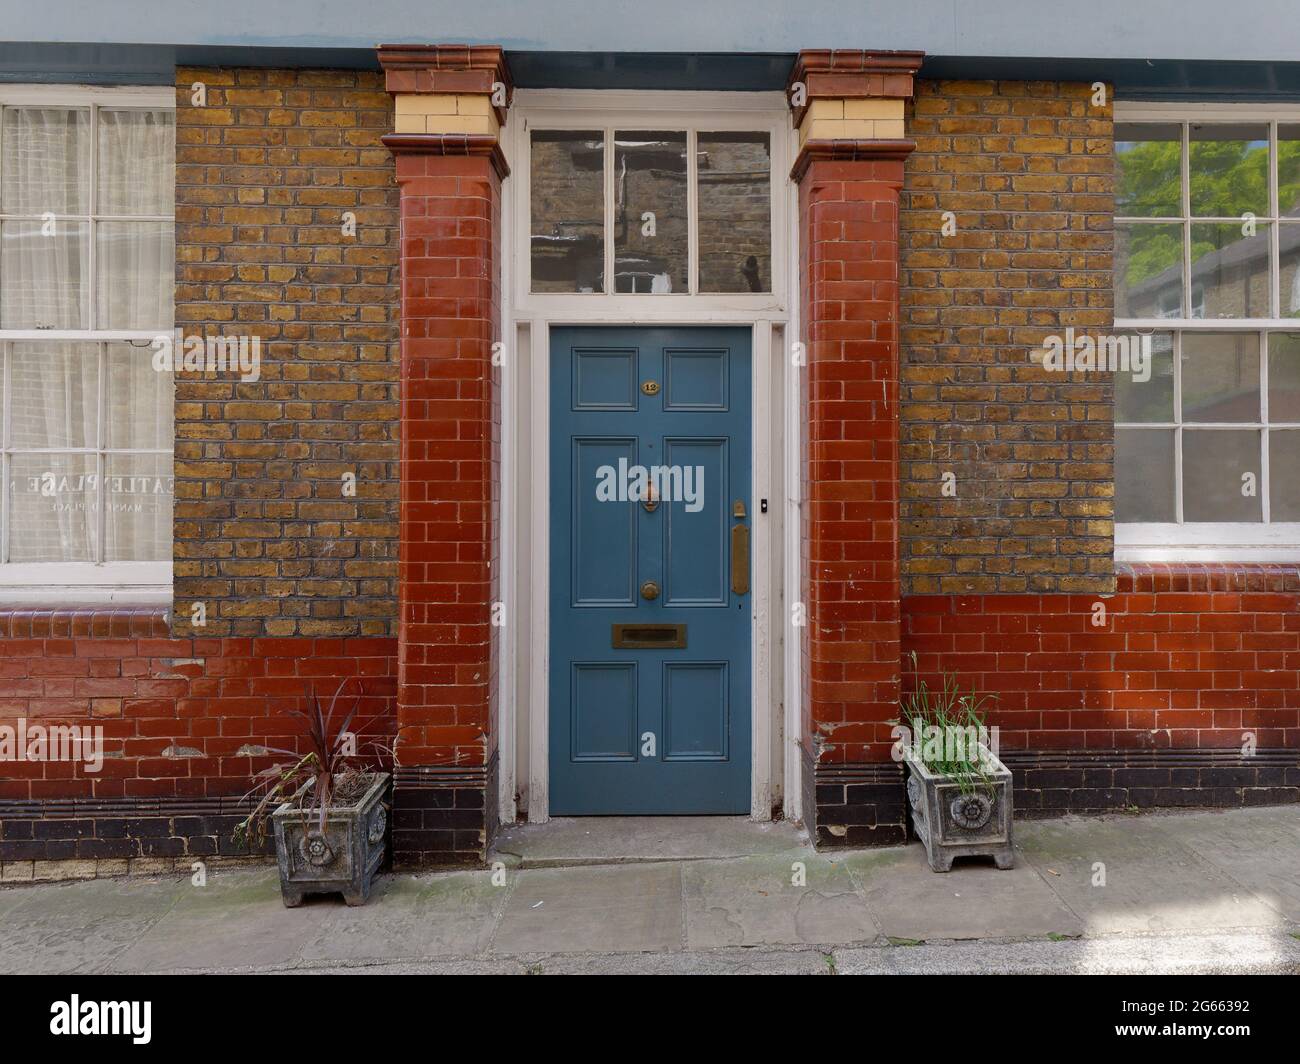 London, Greater London, England - June 26 2021: Blue front door with plant pots outside in Hampstead. Stock Photo